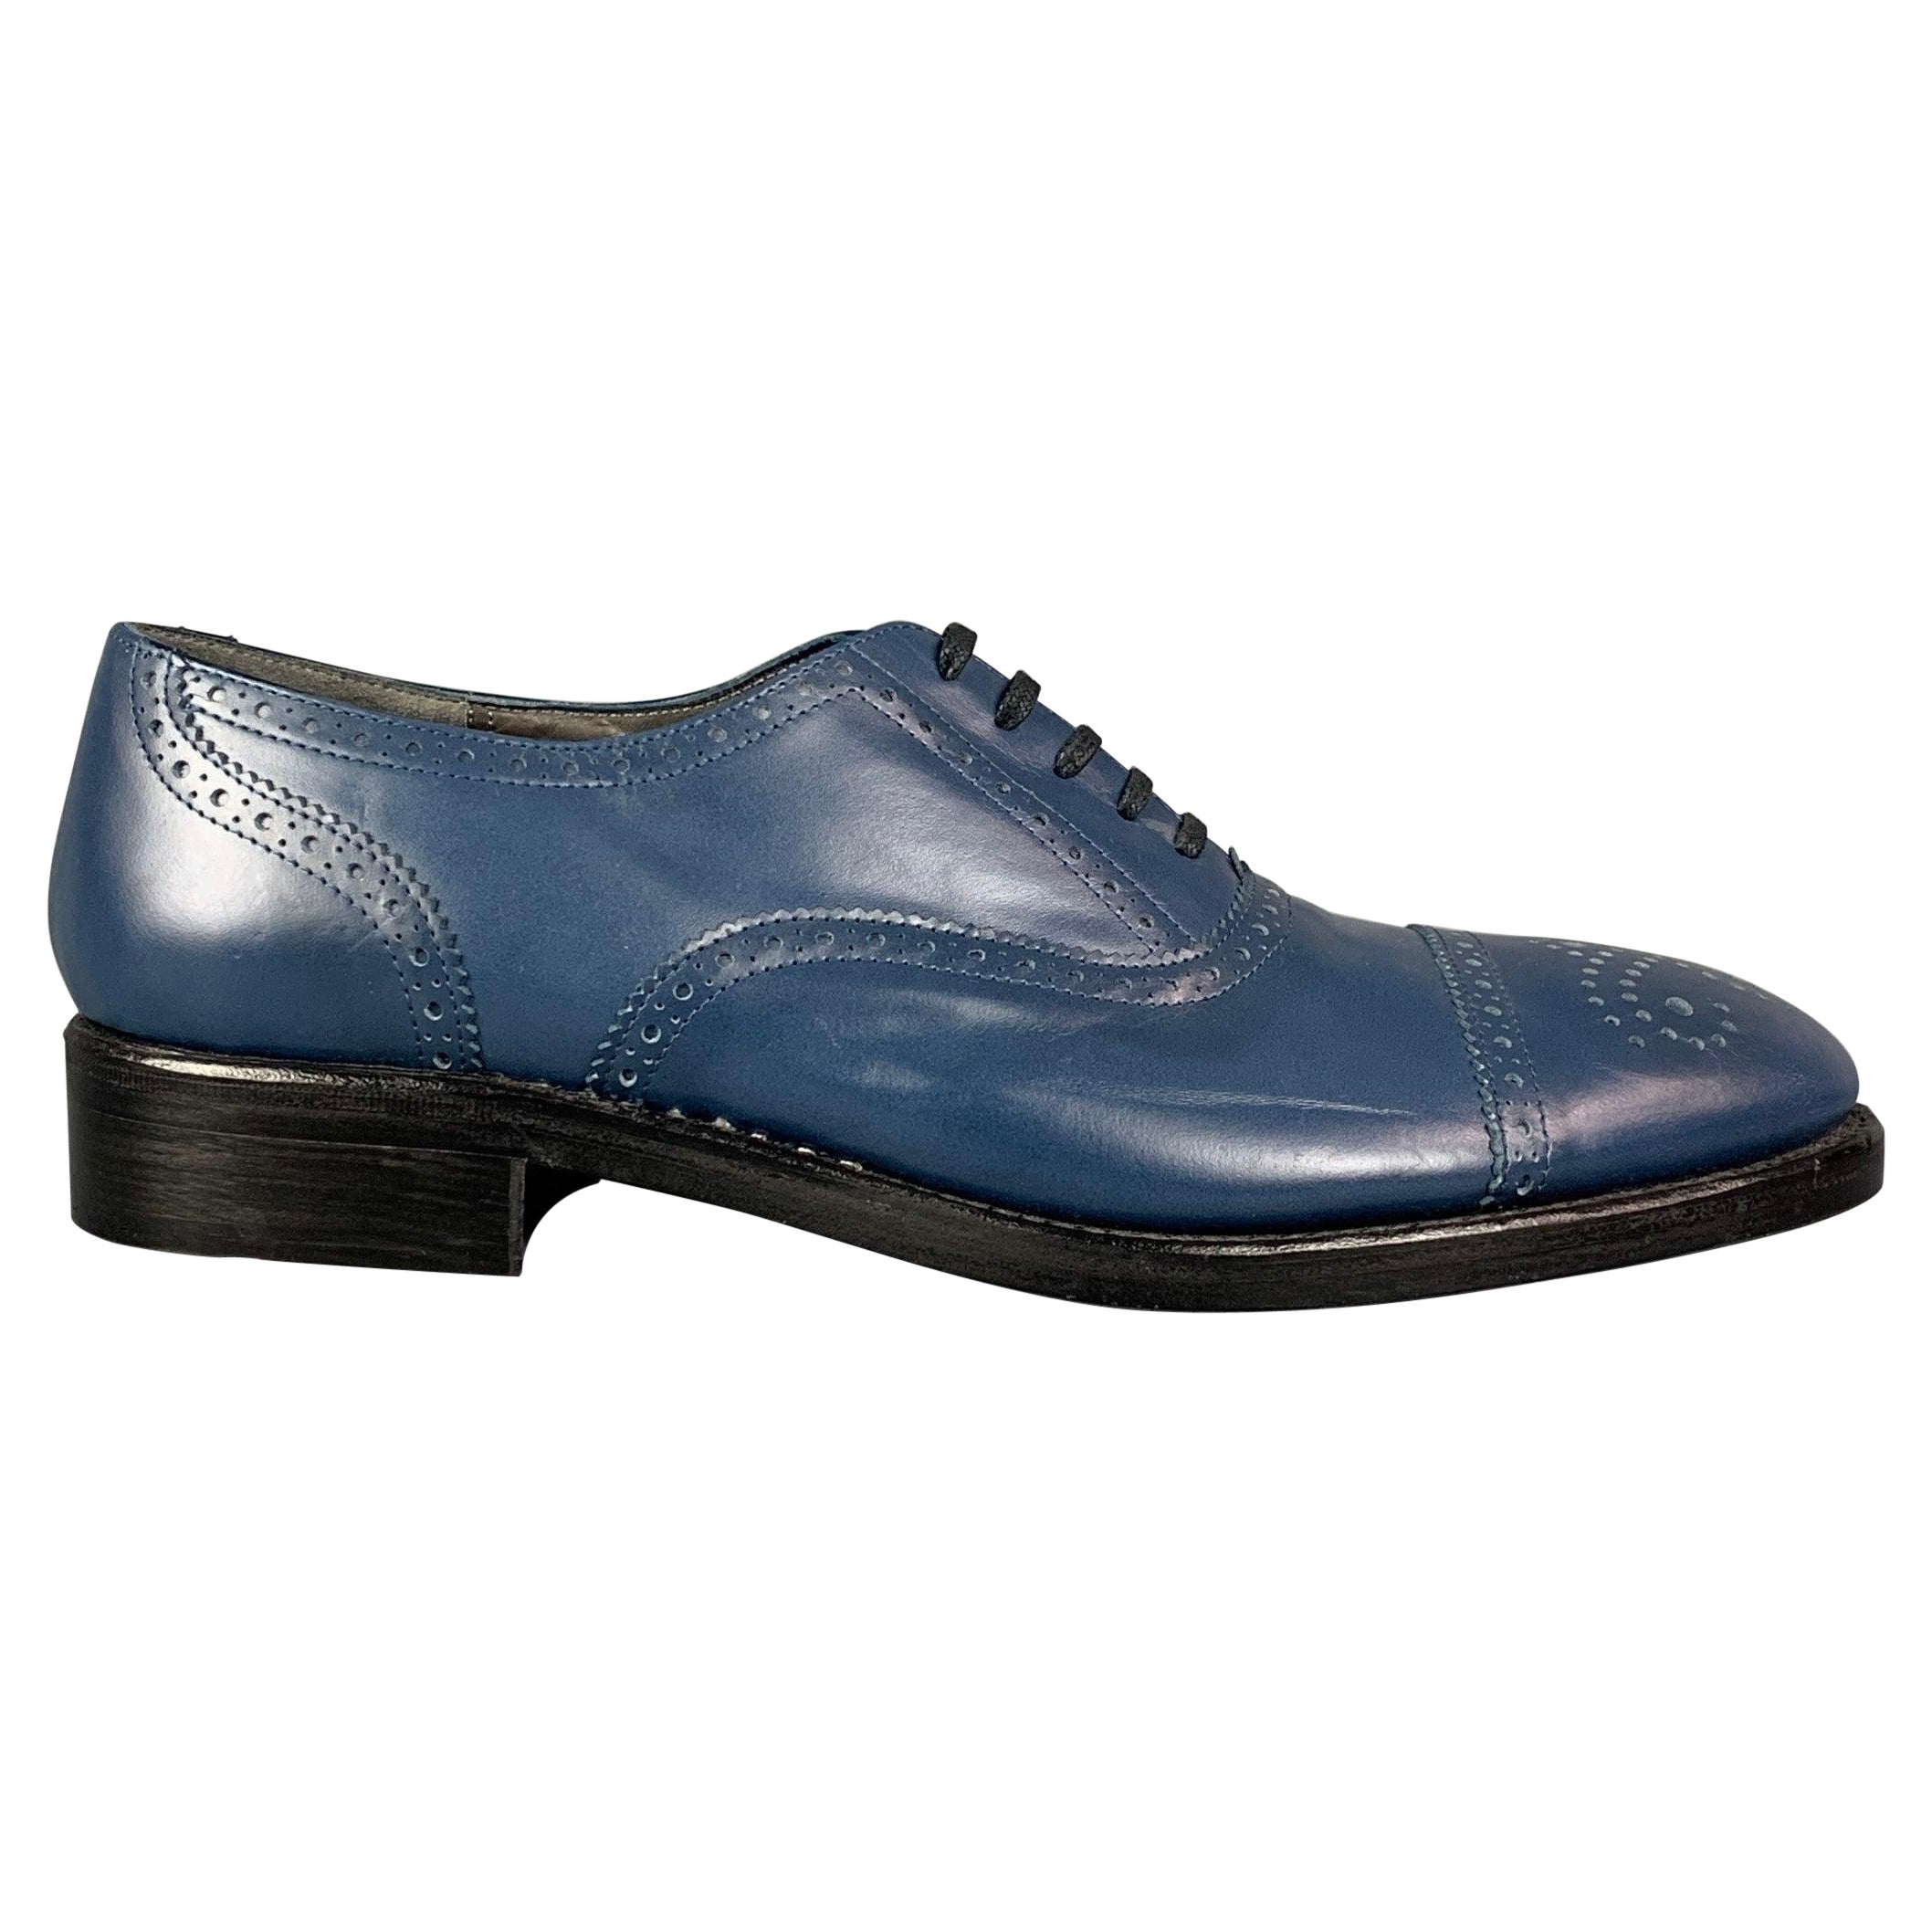 ROBERT CLERGERIE for J. FENESTRIER Size 9 Blue Leather Cap Toe Lace Up Shoes For Sale